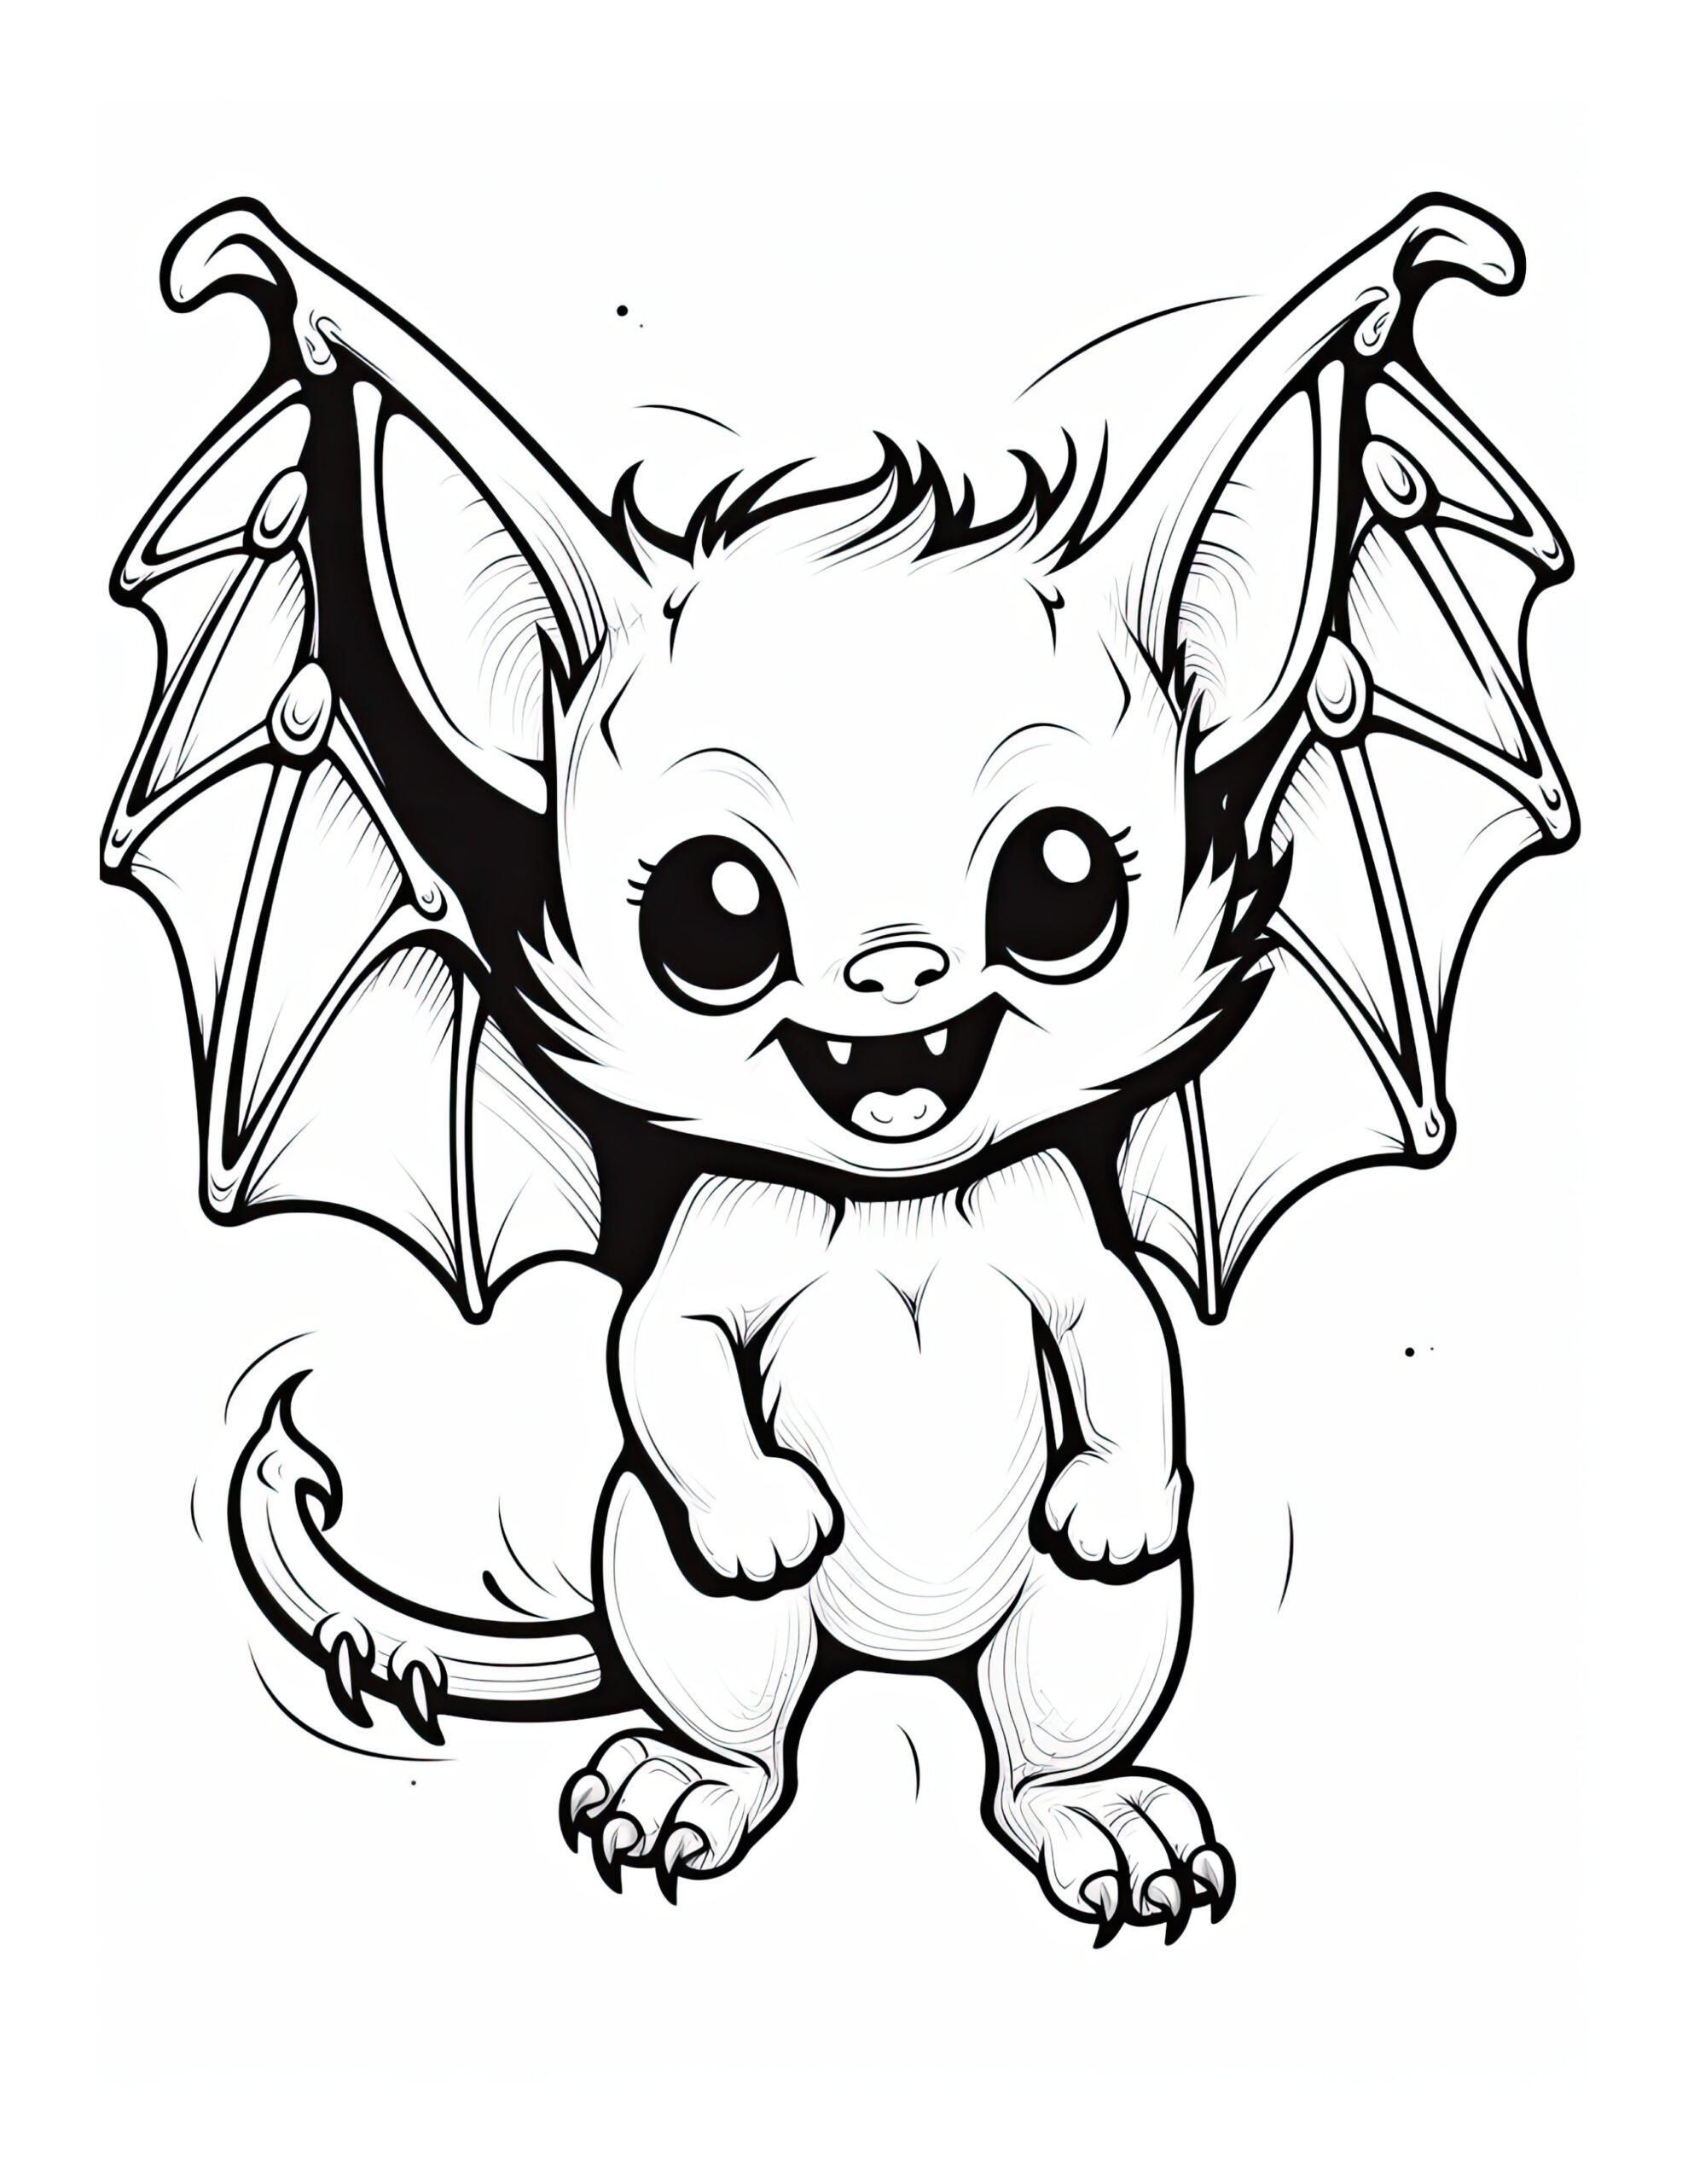 Free Printable Midnight Mystique - Bat Coloring Page For Kids And Adults